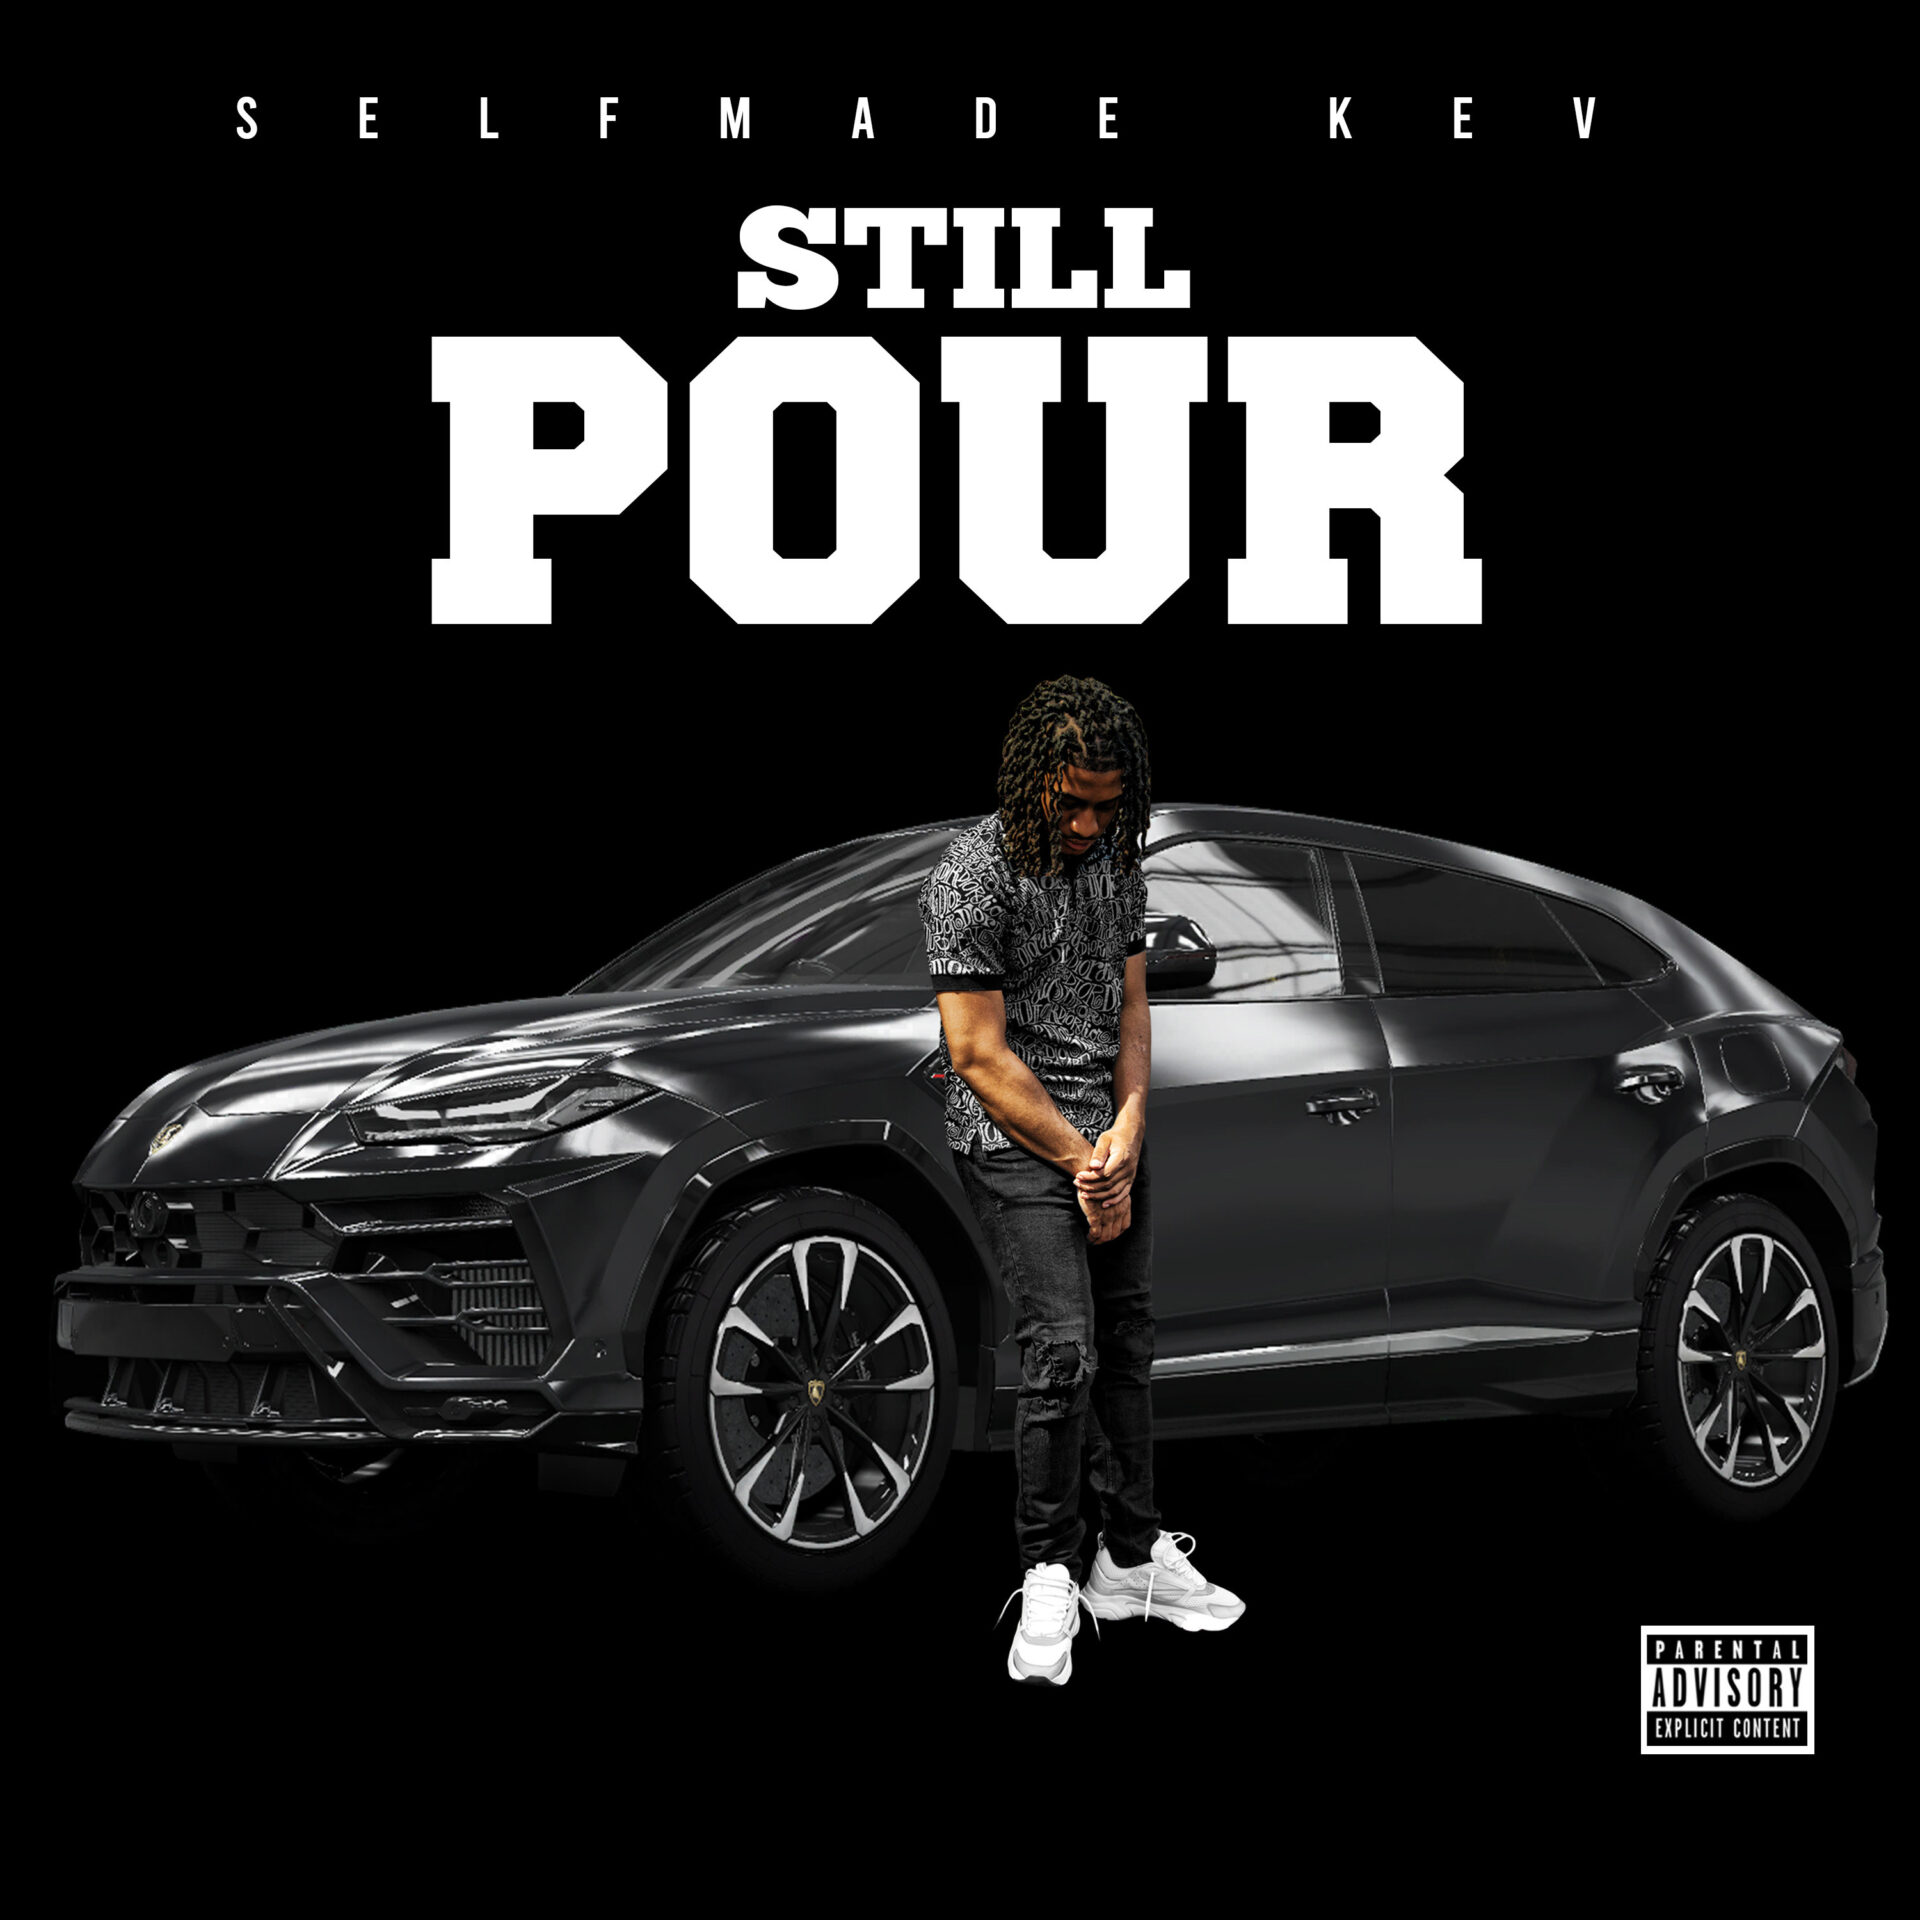 Selfmade Kev Becomes NYC’s New Sensation With Family on “Still Pour”